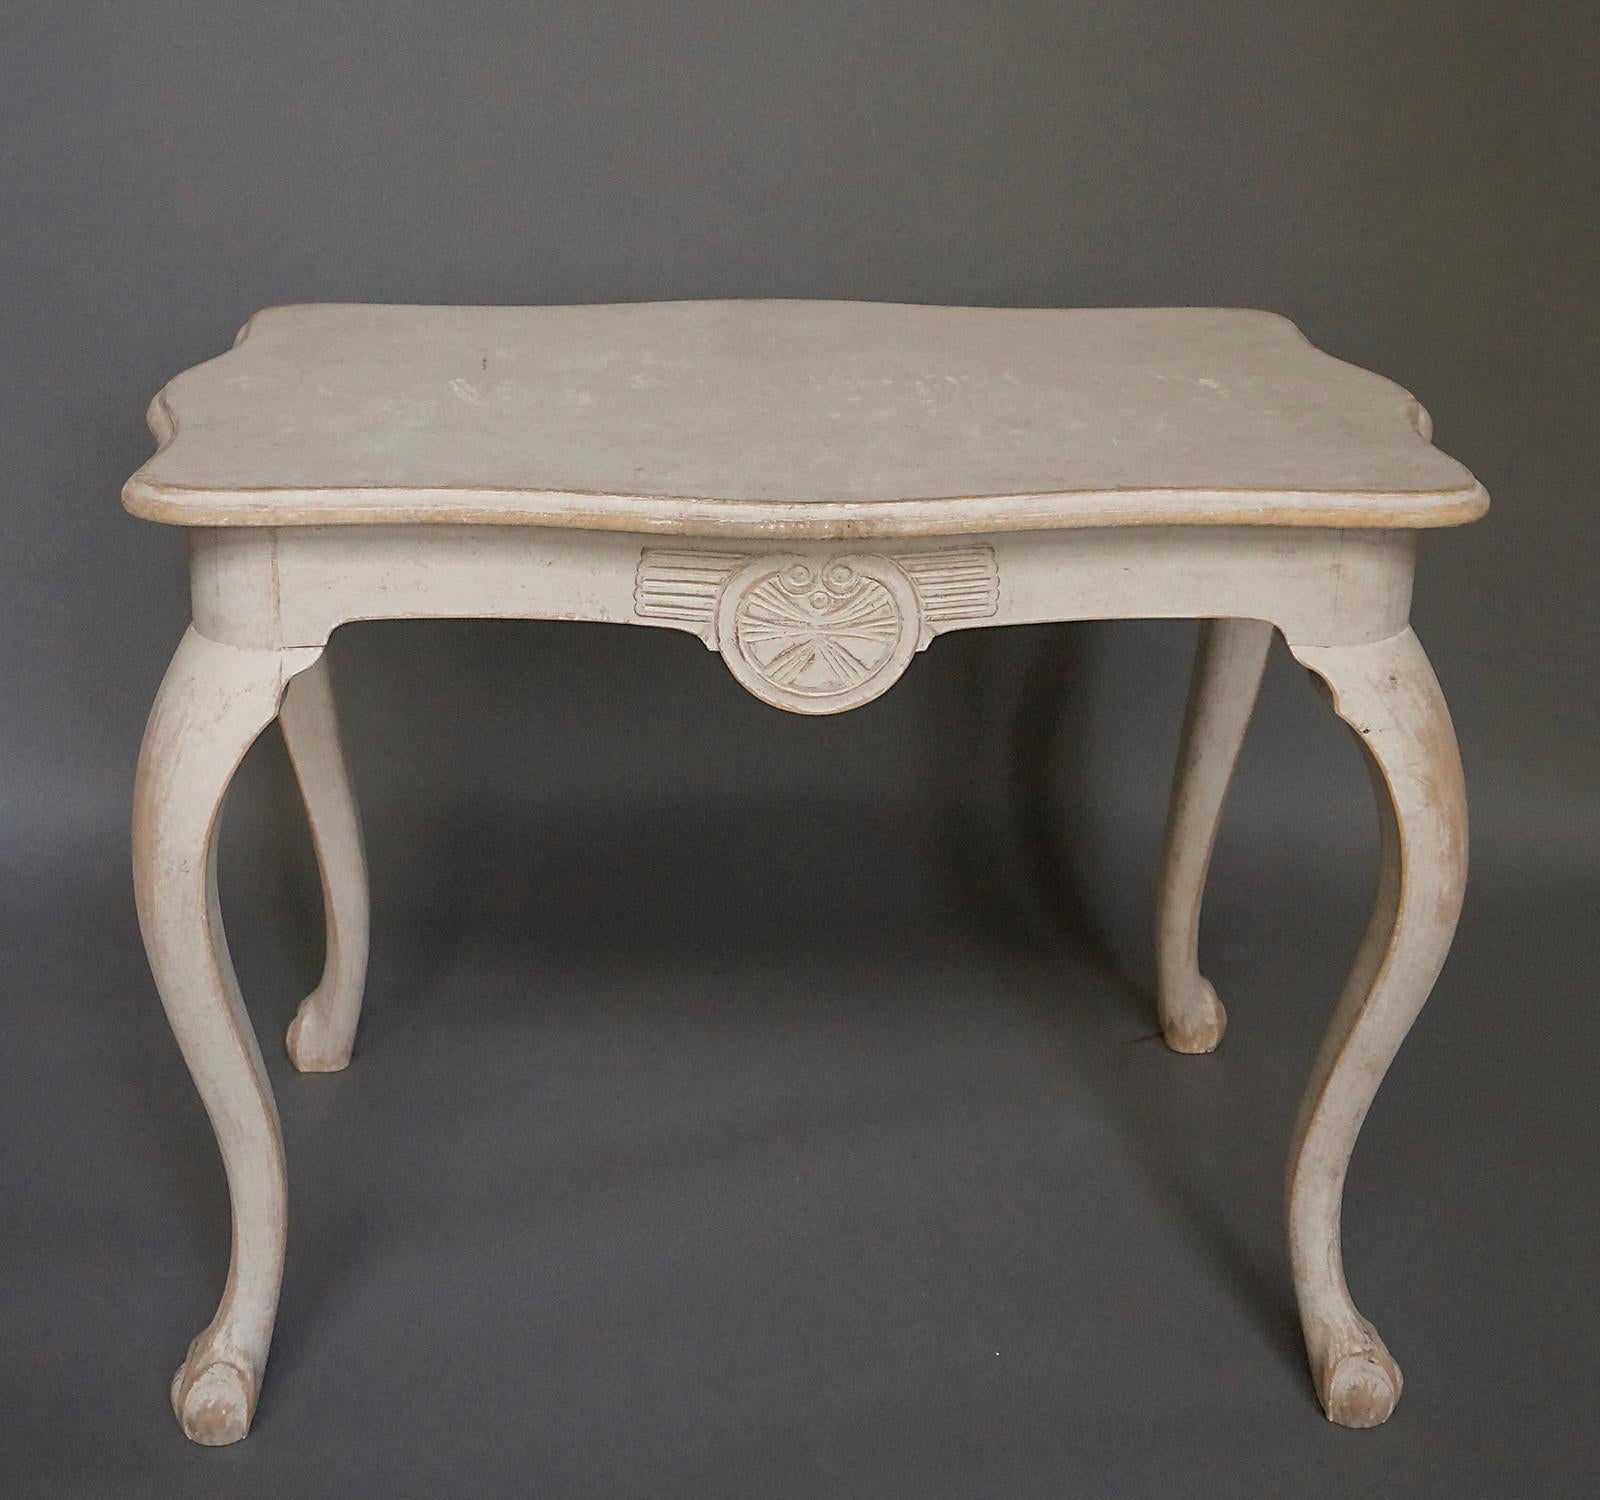 Swedish side table with shaped top, cabriole legs and ball and claw feet. Each side features an unusual carved medallion at the center of the apron. Nice patina.